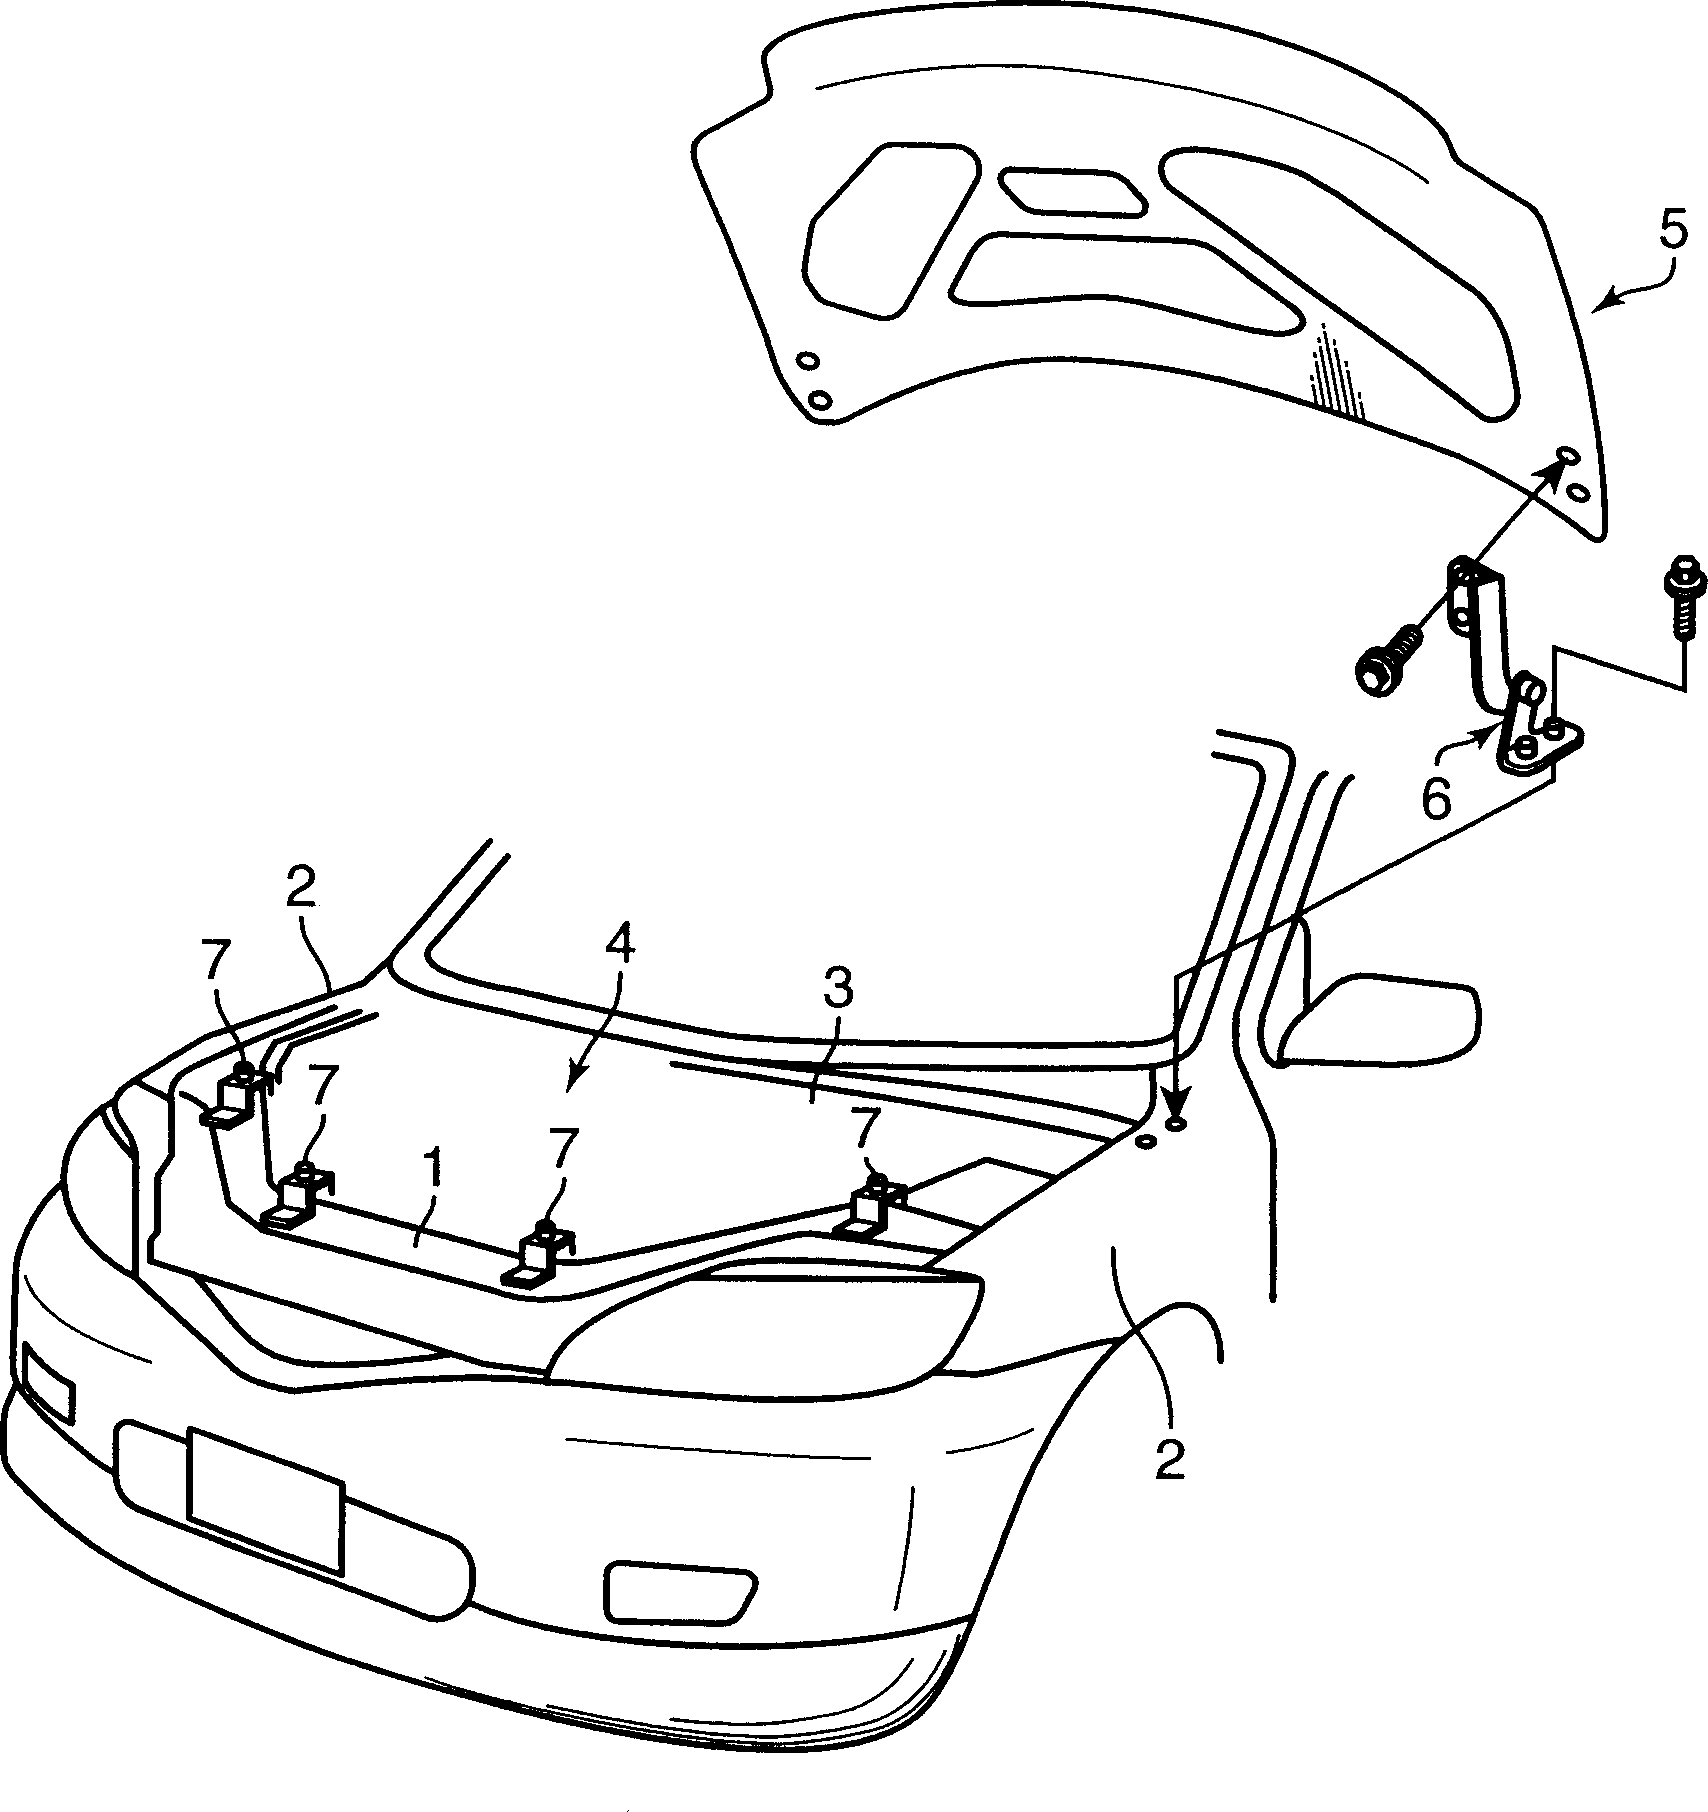 Hood stopper structure for automobile